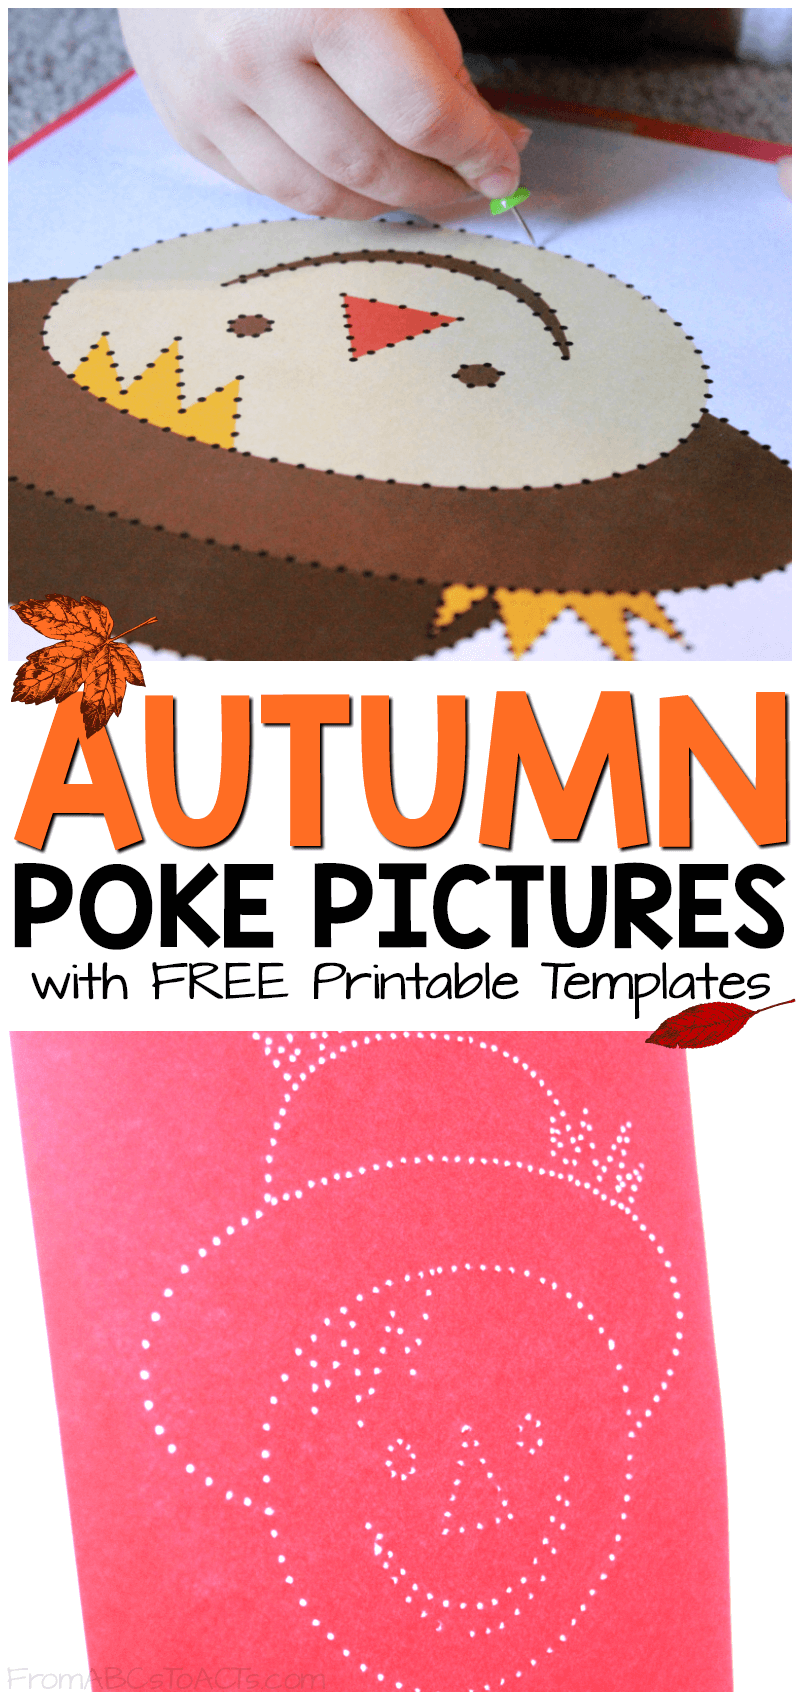 Work on fine motor skills with your preschooler or kindergartner while making some awesome fall decorations for your windows! These fall poke pictures are so much fun and so easy to make!